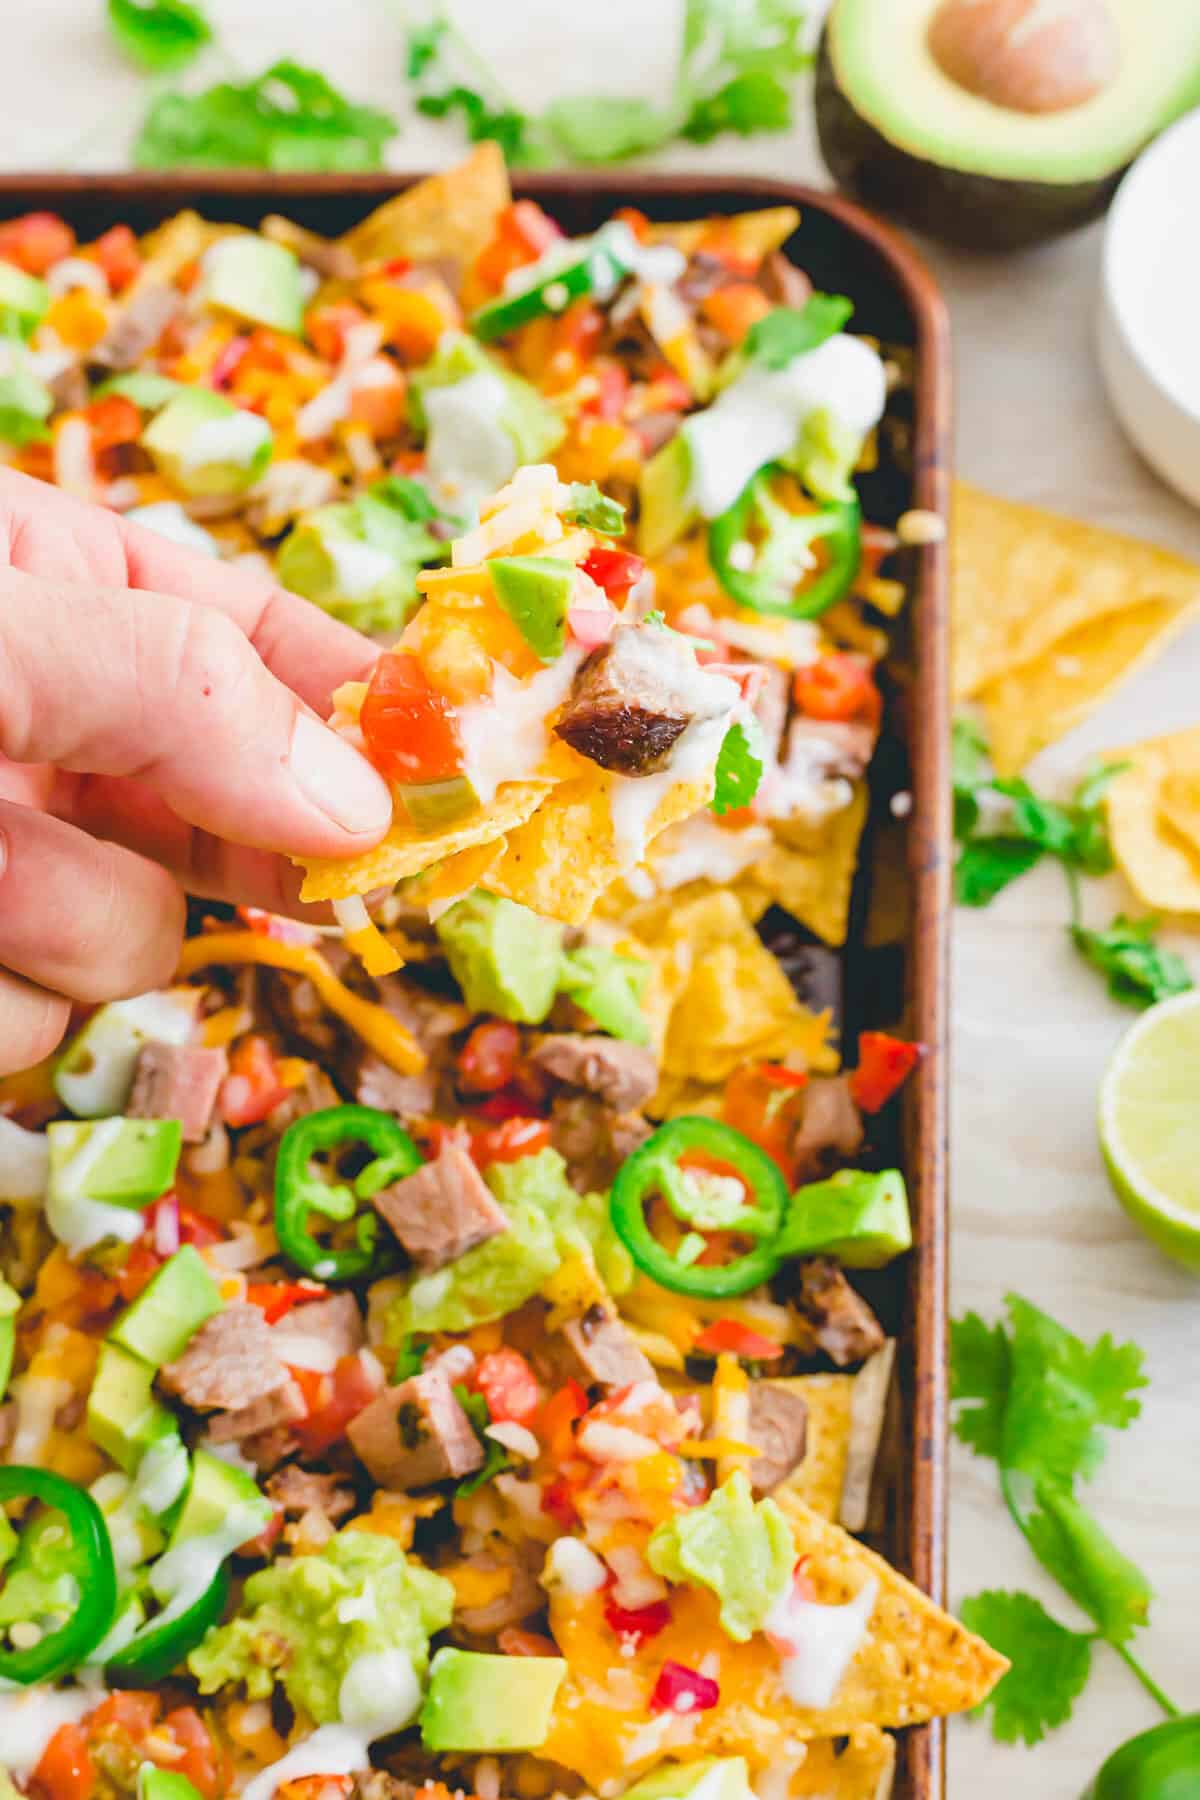 Nachos de carne asada made with marinated flank steak cooked on the grill.